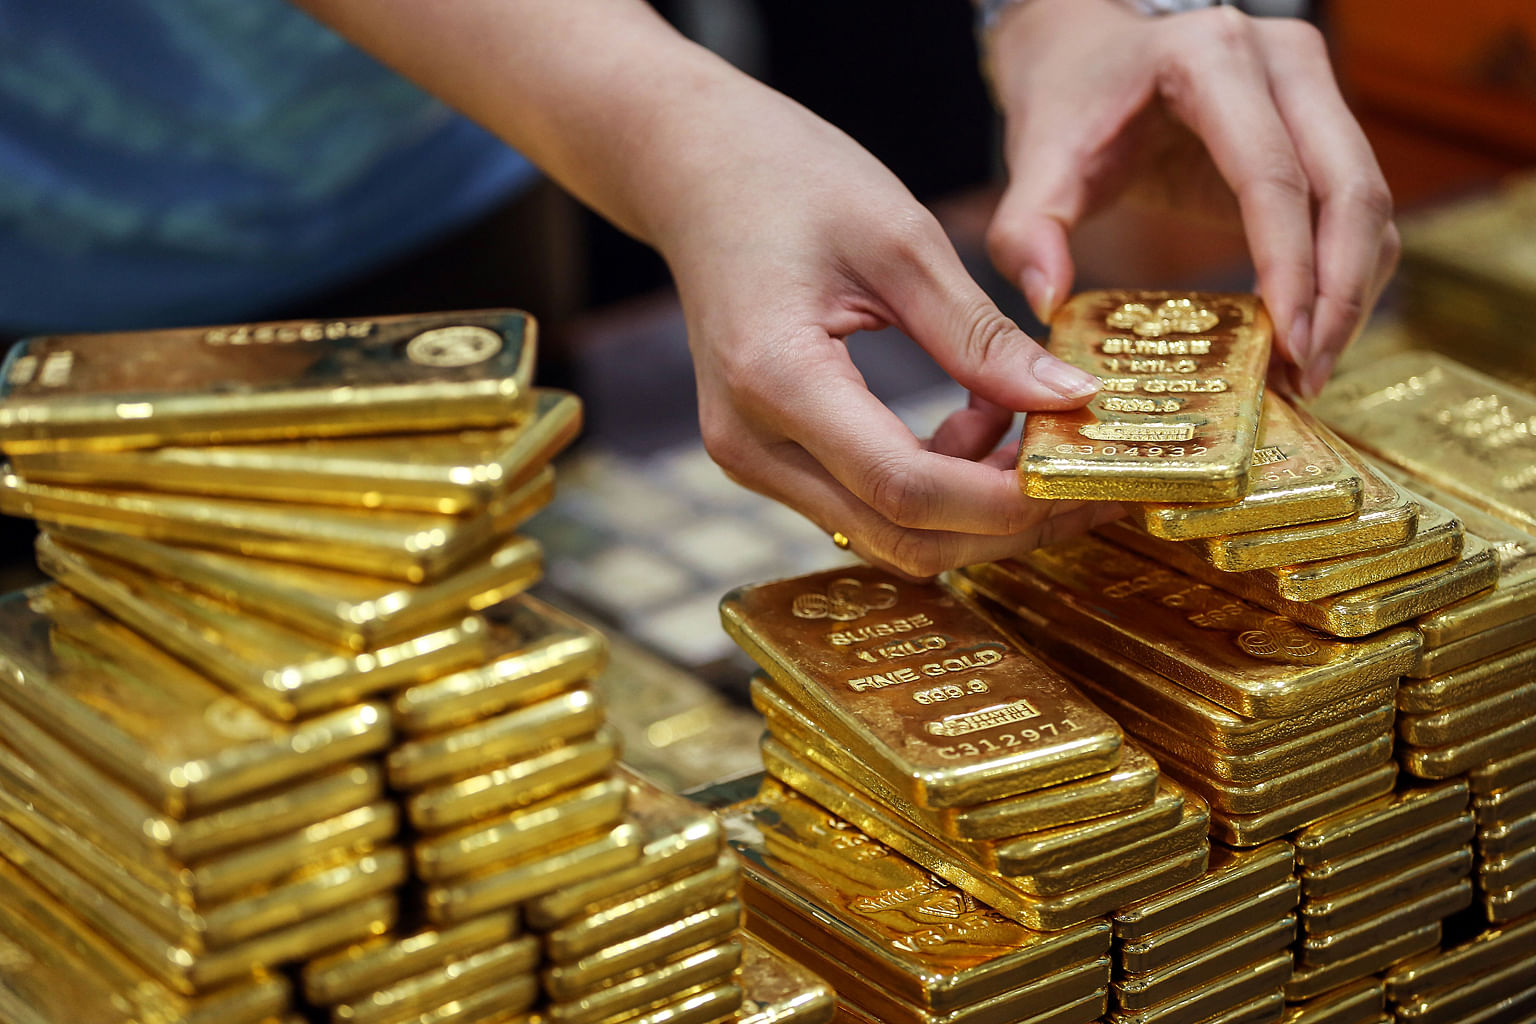 Gold positions have either been trimmed or sold off following the market rebound after the US elections. Cash levels are now below 1 per cent for all three portfolios, with the money channelled to equities.